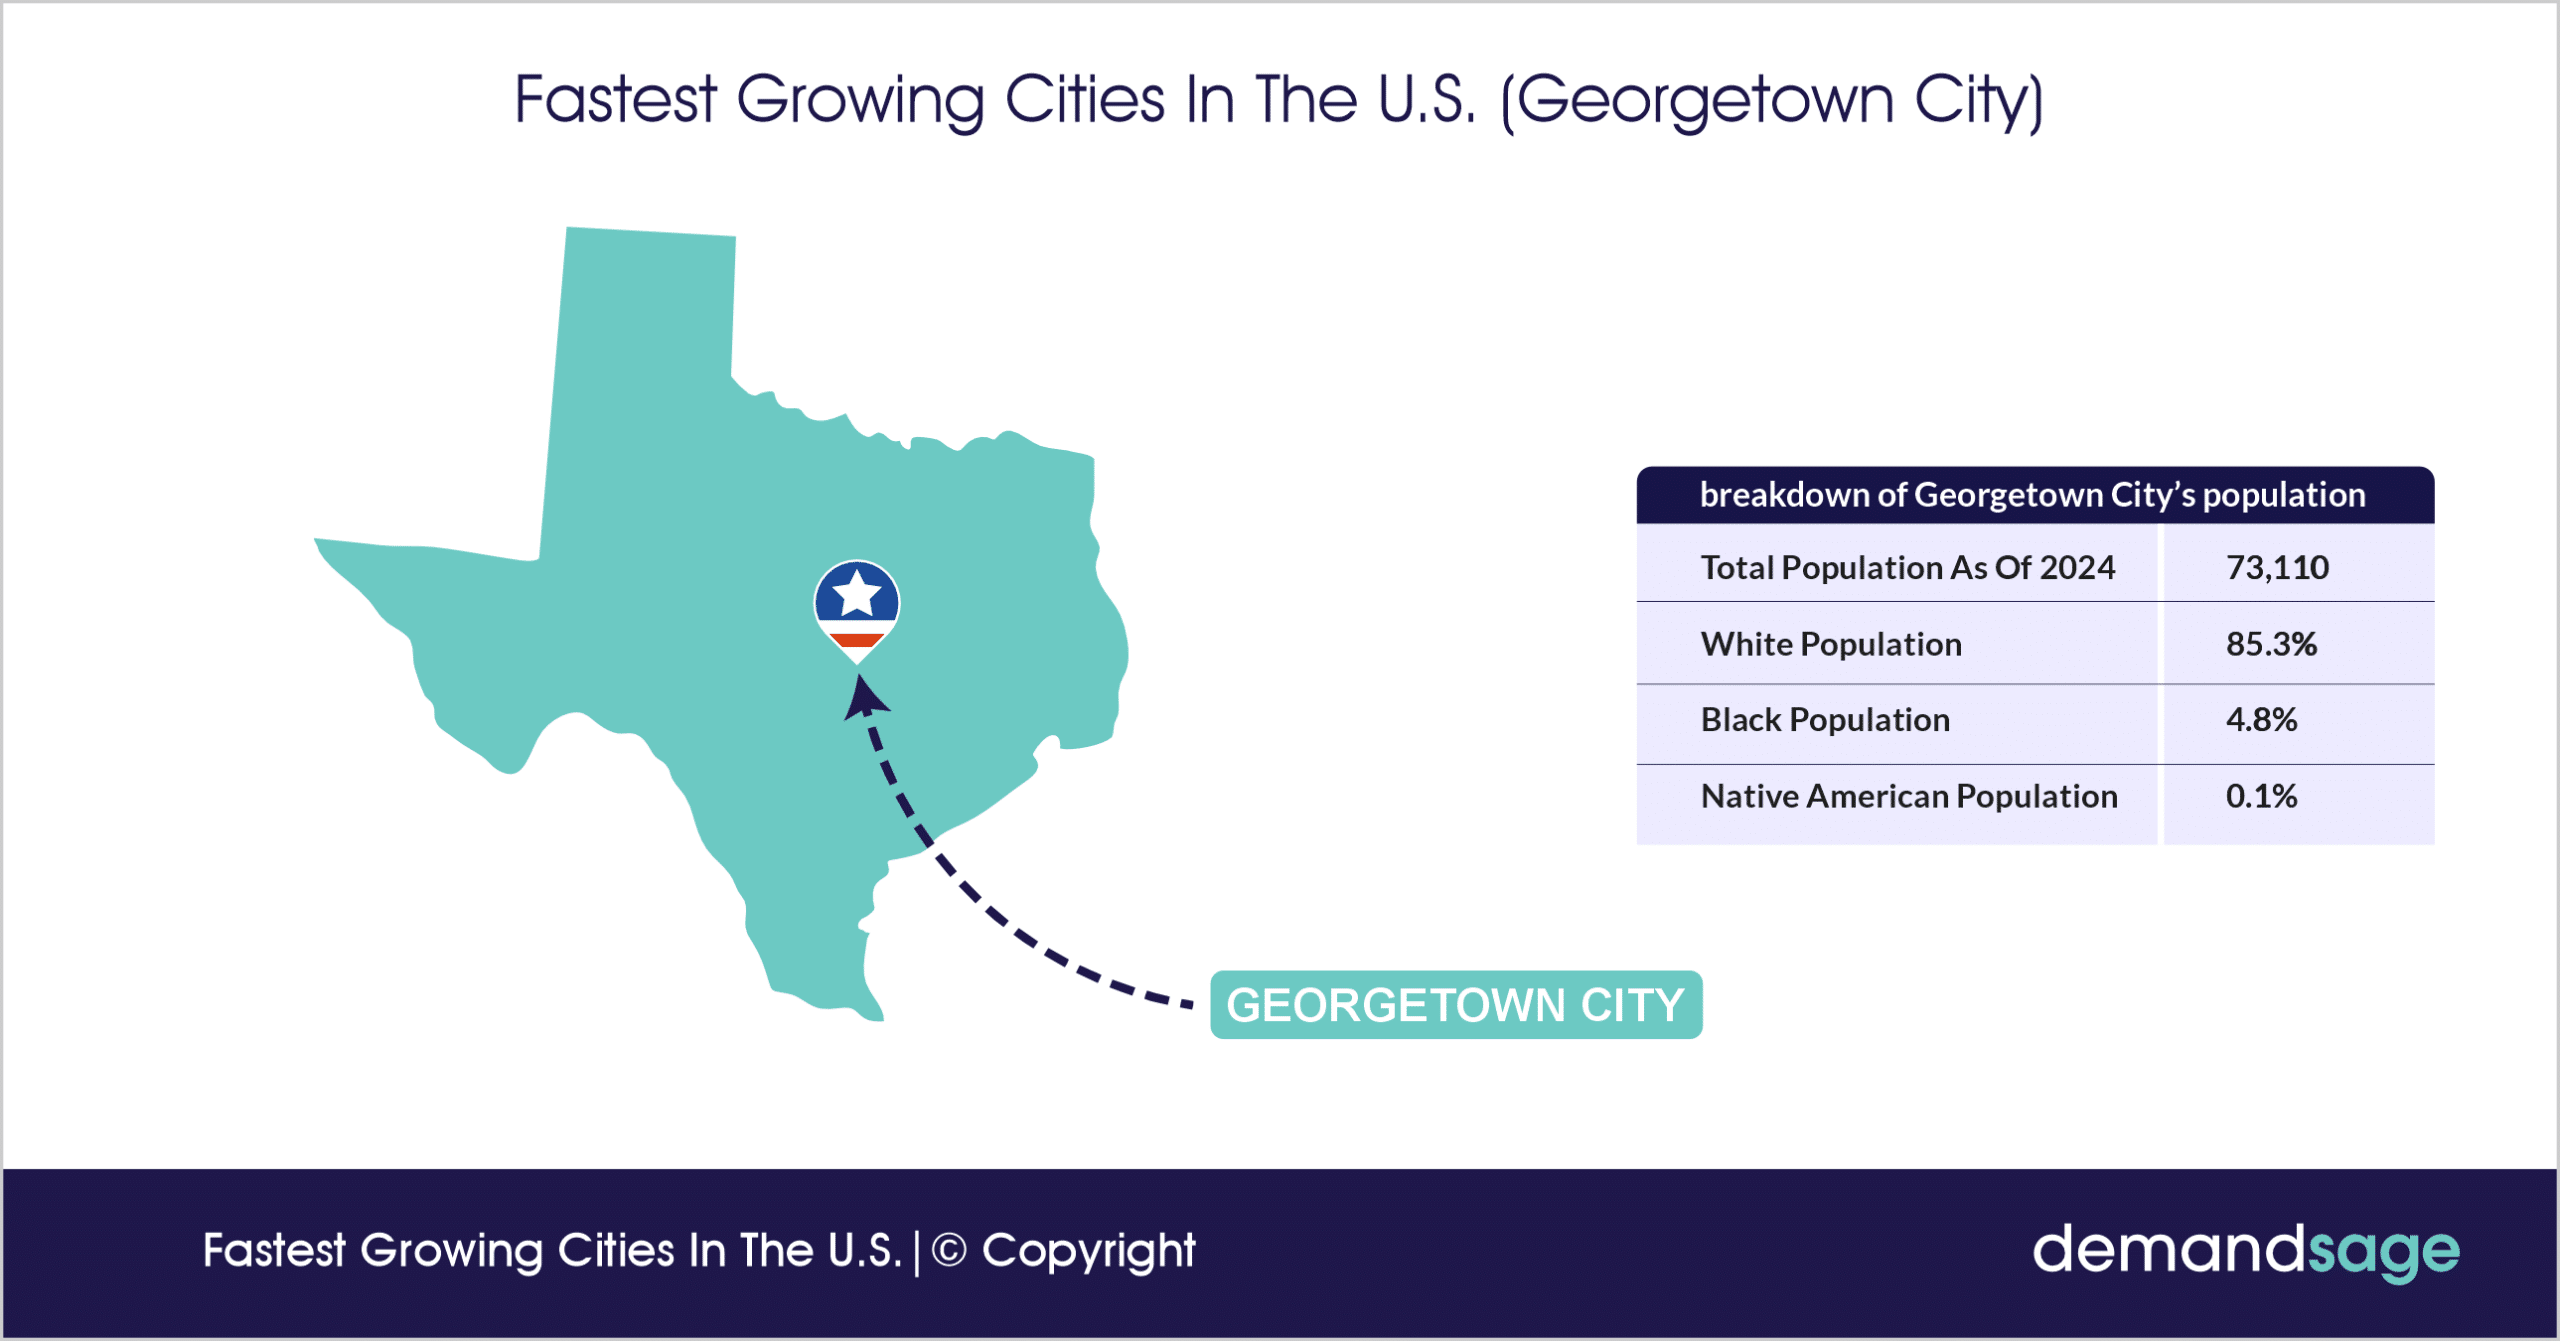 Fastest Growing Cities In The U.S. (Georgetown City)